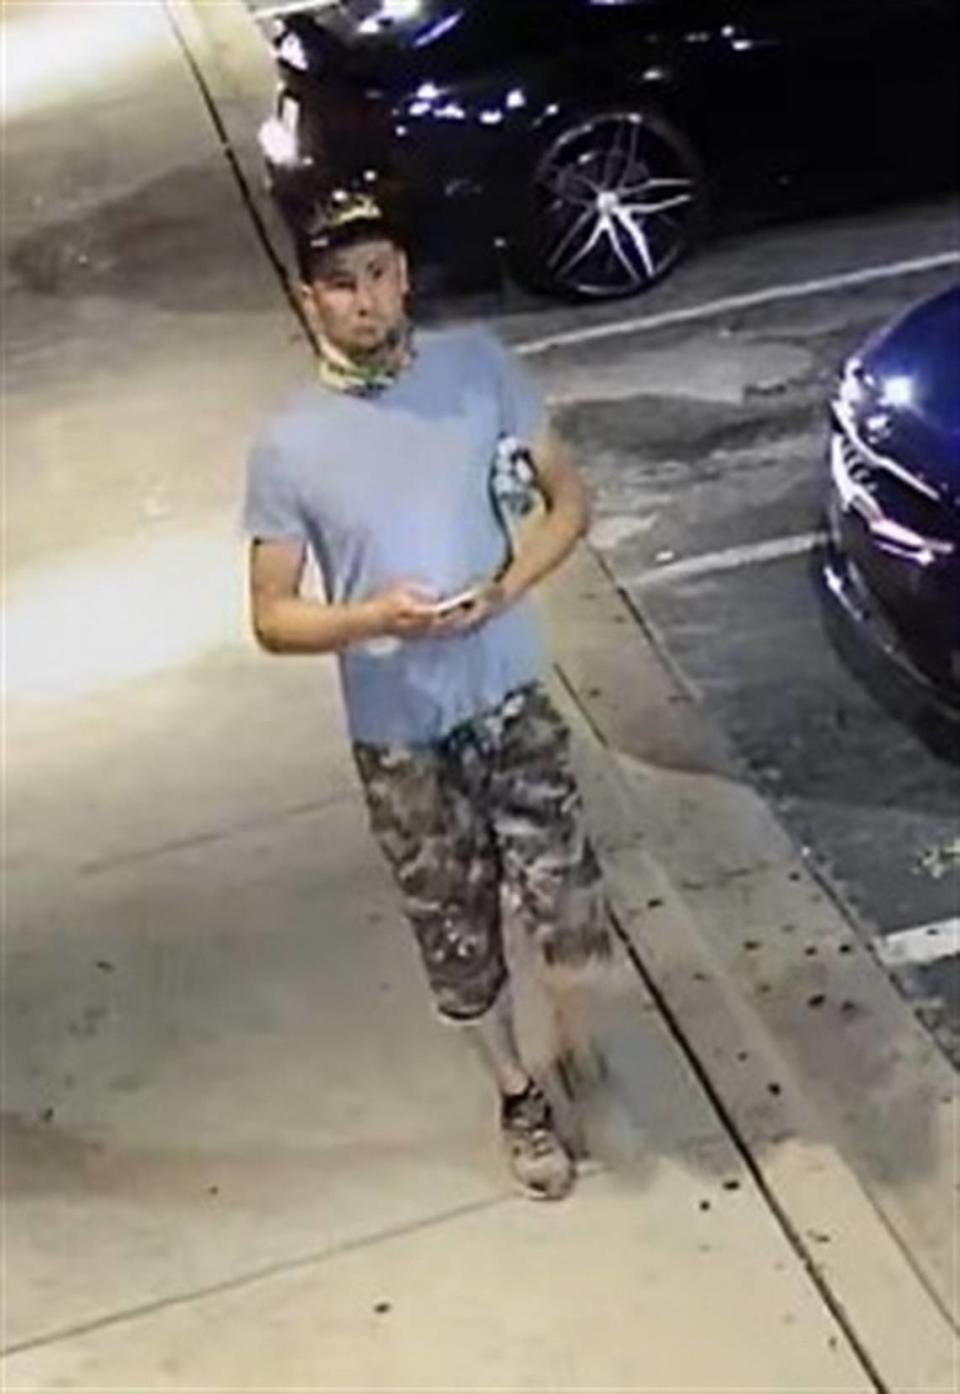 Charlotte-Mecklenburg Police Department is looking for a man who raped a woman in south Charlotte Wednesday, August 2, 2023. He is a 5’10” Hispanic male in his mid-20’s, who has short black hair and was last seen wearing a baseball cap, light colored shirt, a floral-patterned neck gaiter and camouflage shorts. He may have scratches — left from his victim — on his face and neck, police said. Charlotte-Mecklenburg Police Department